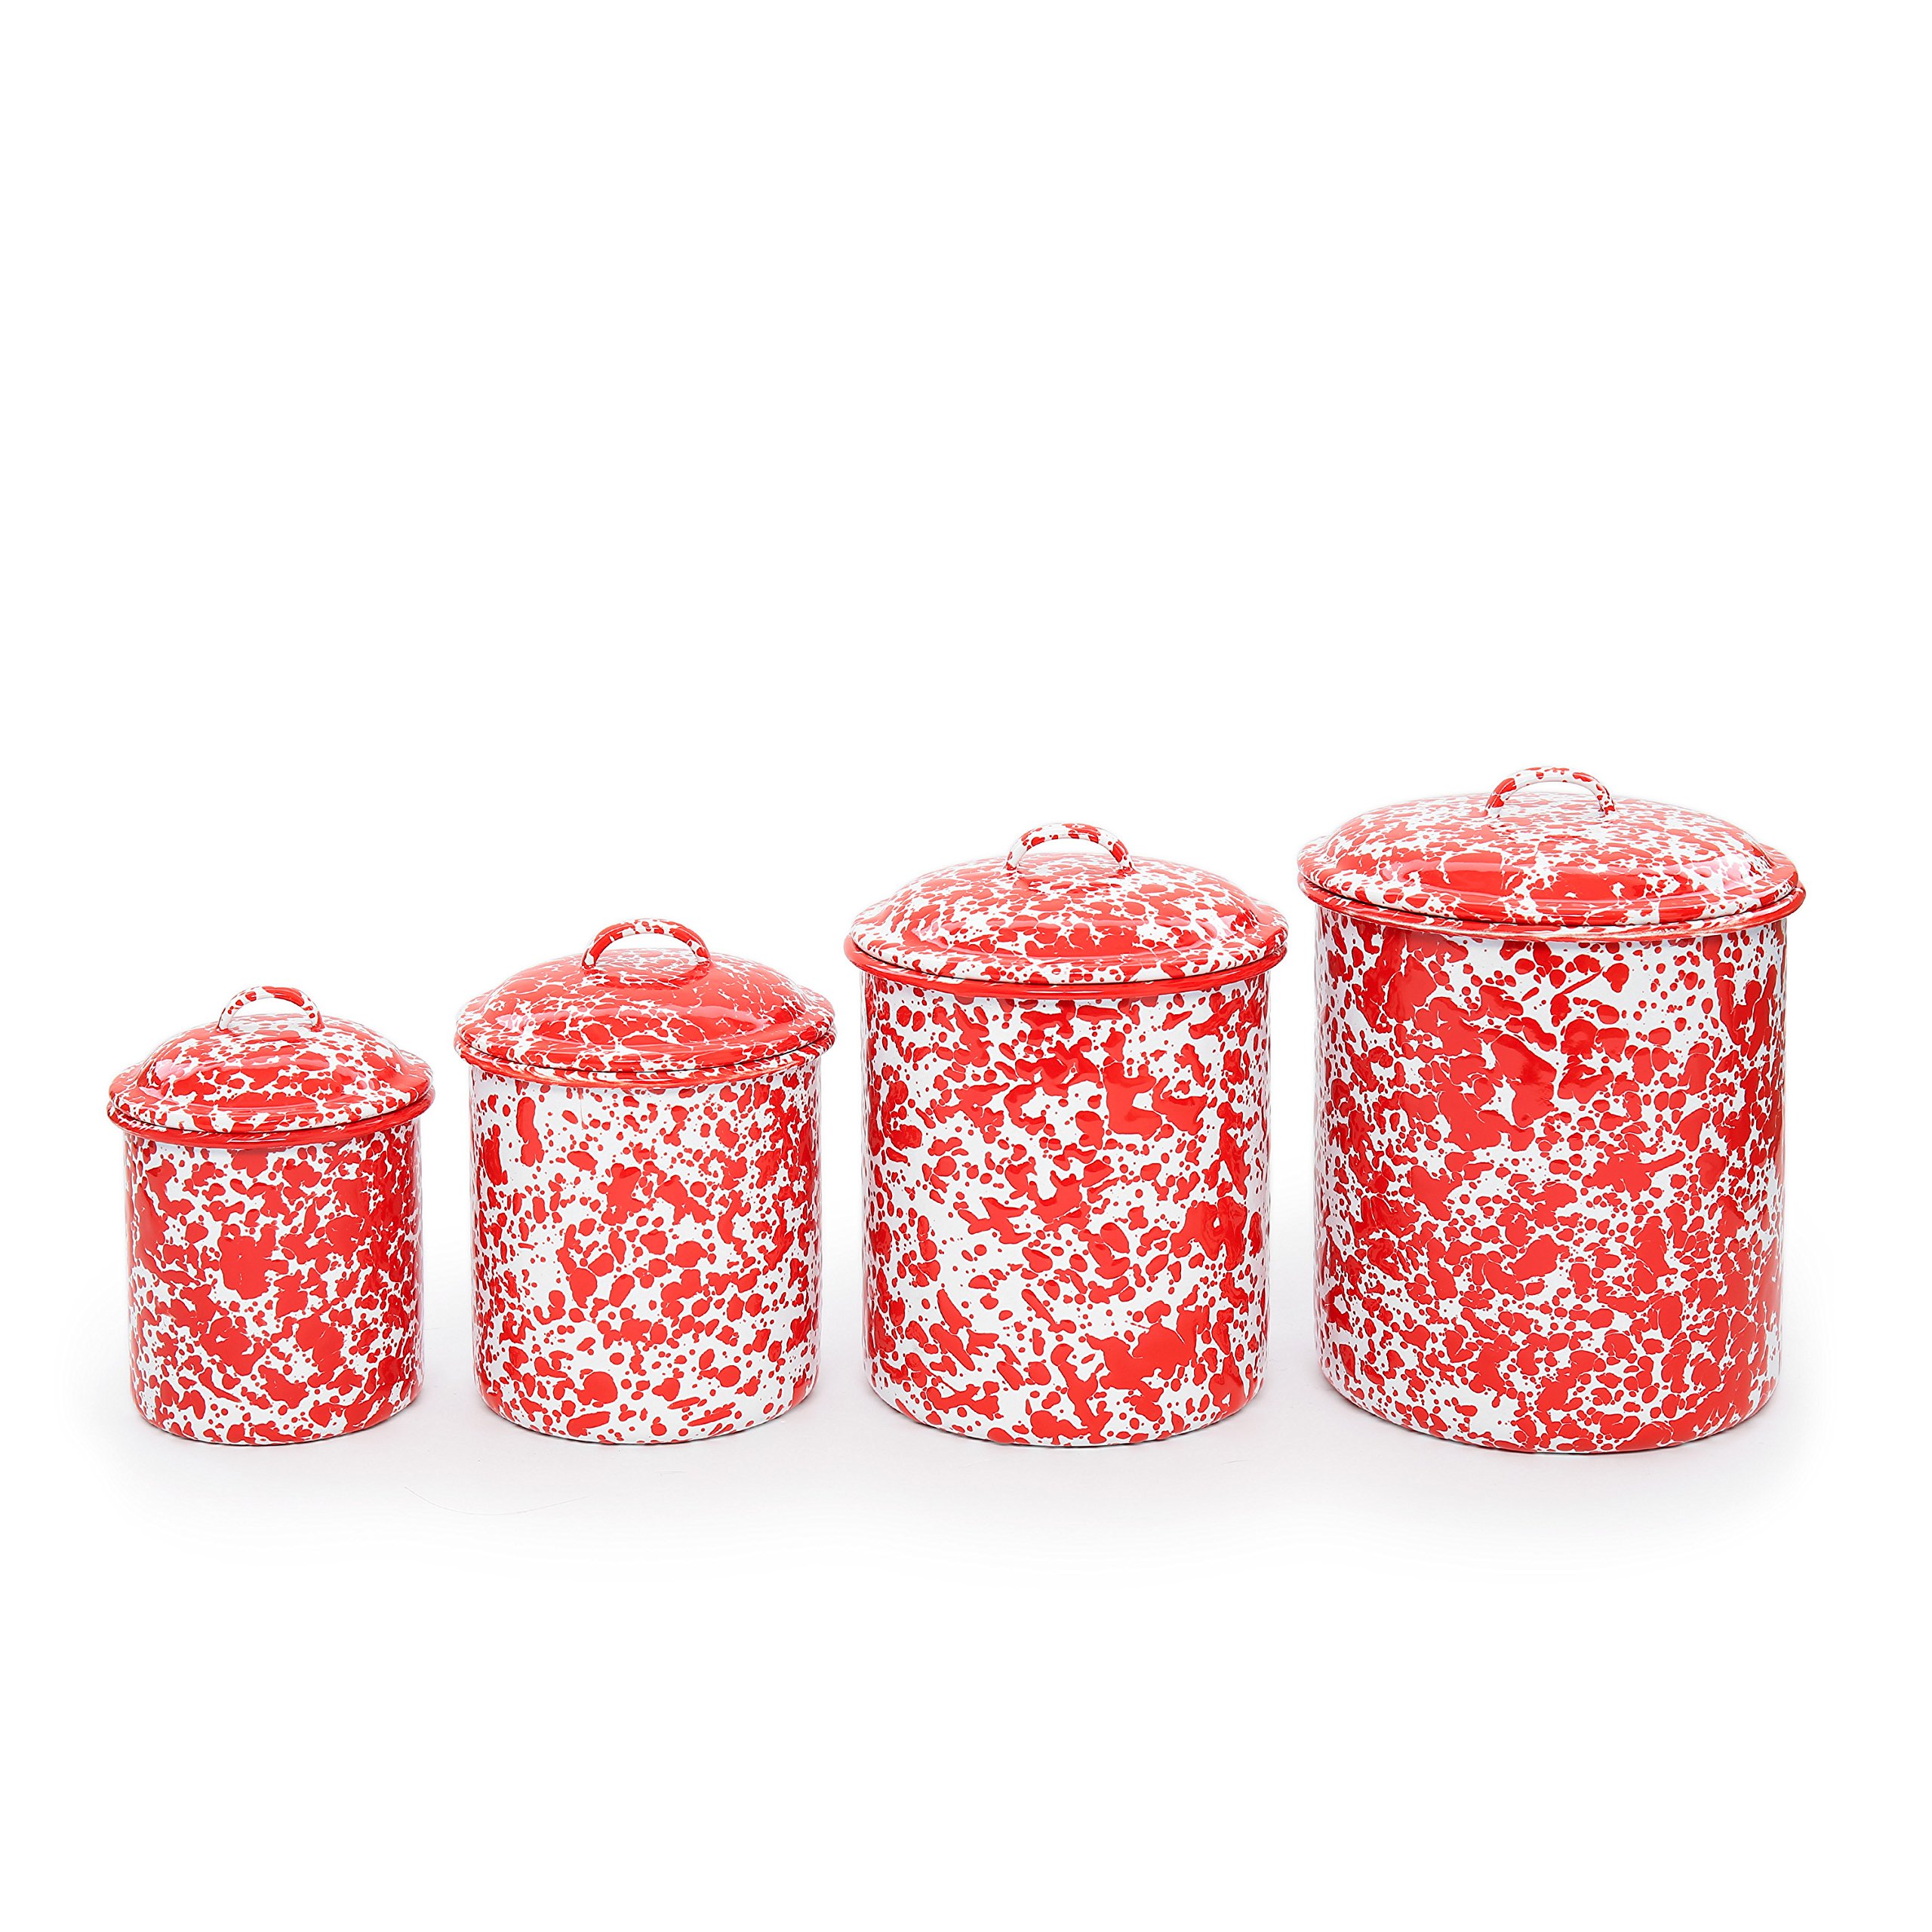 Enamelware 4 Piece Canister Set - Red Marble